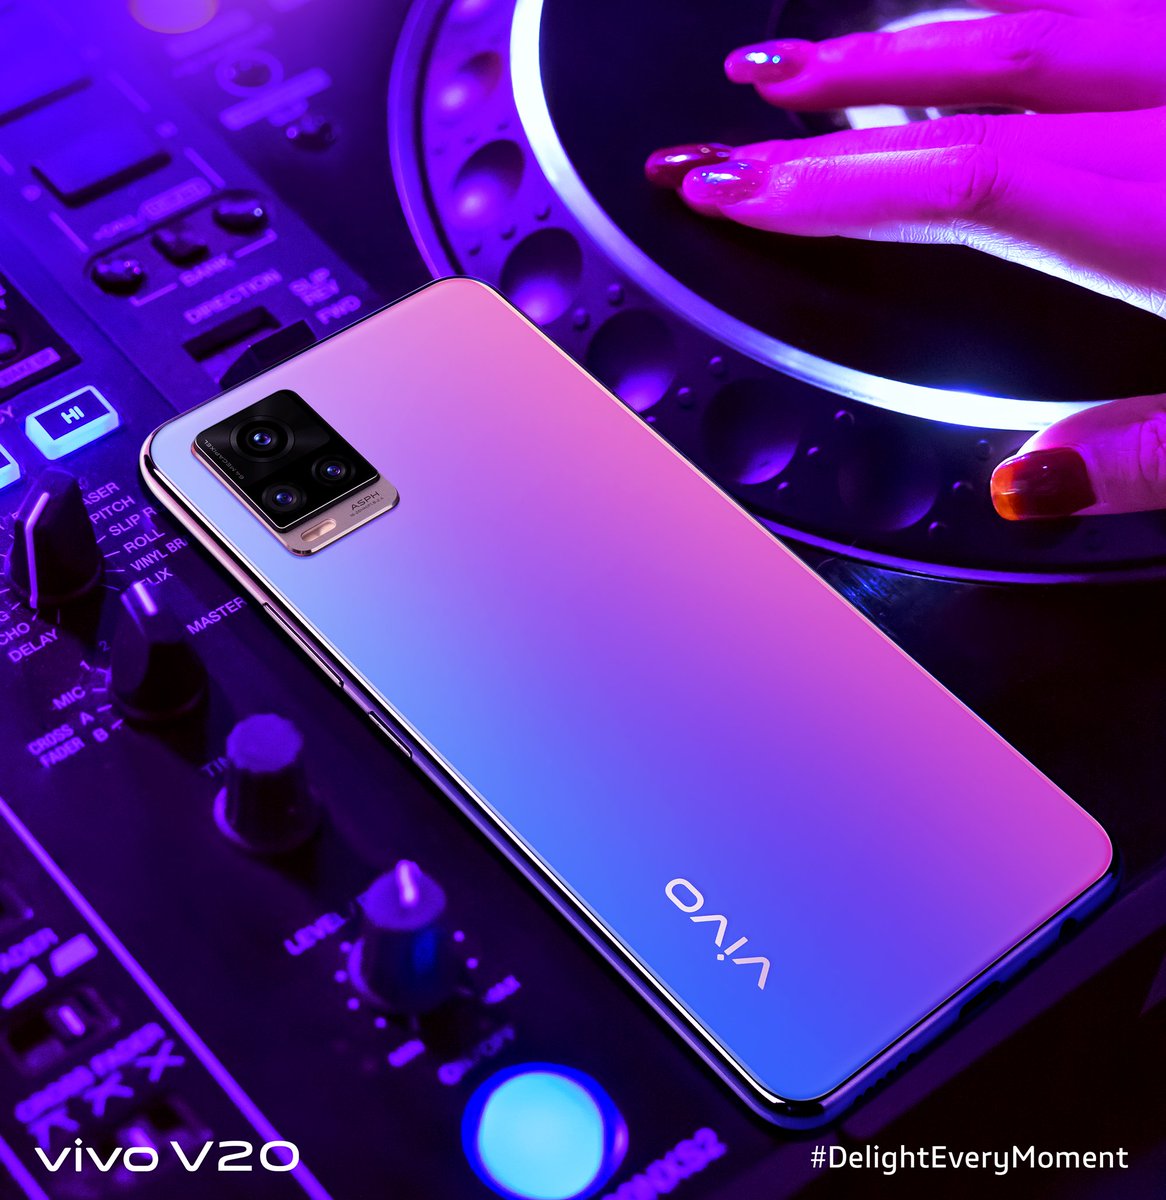 Amazing color of V20.